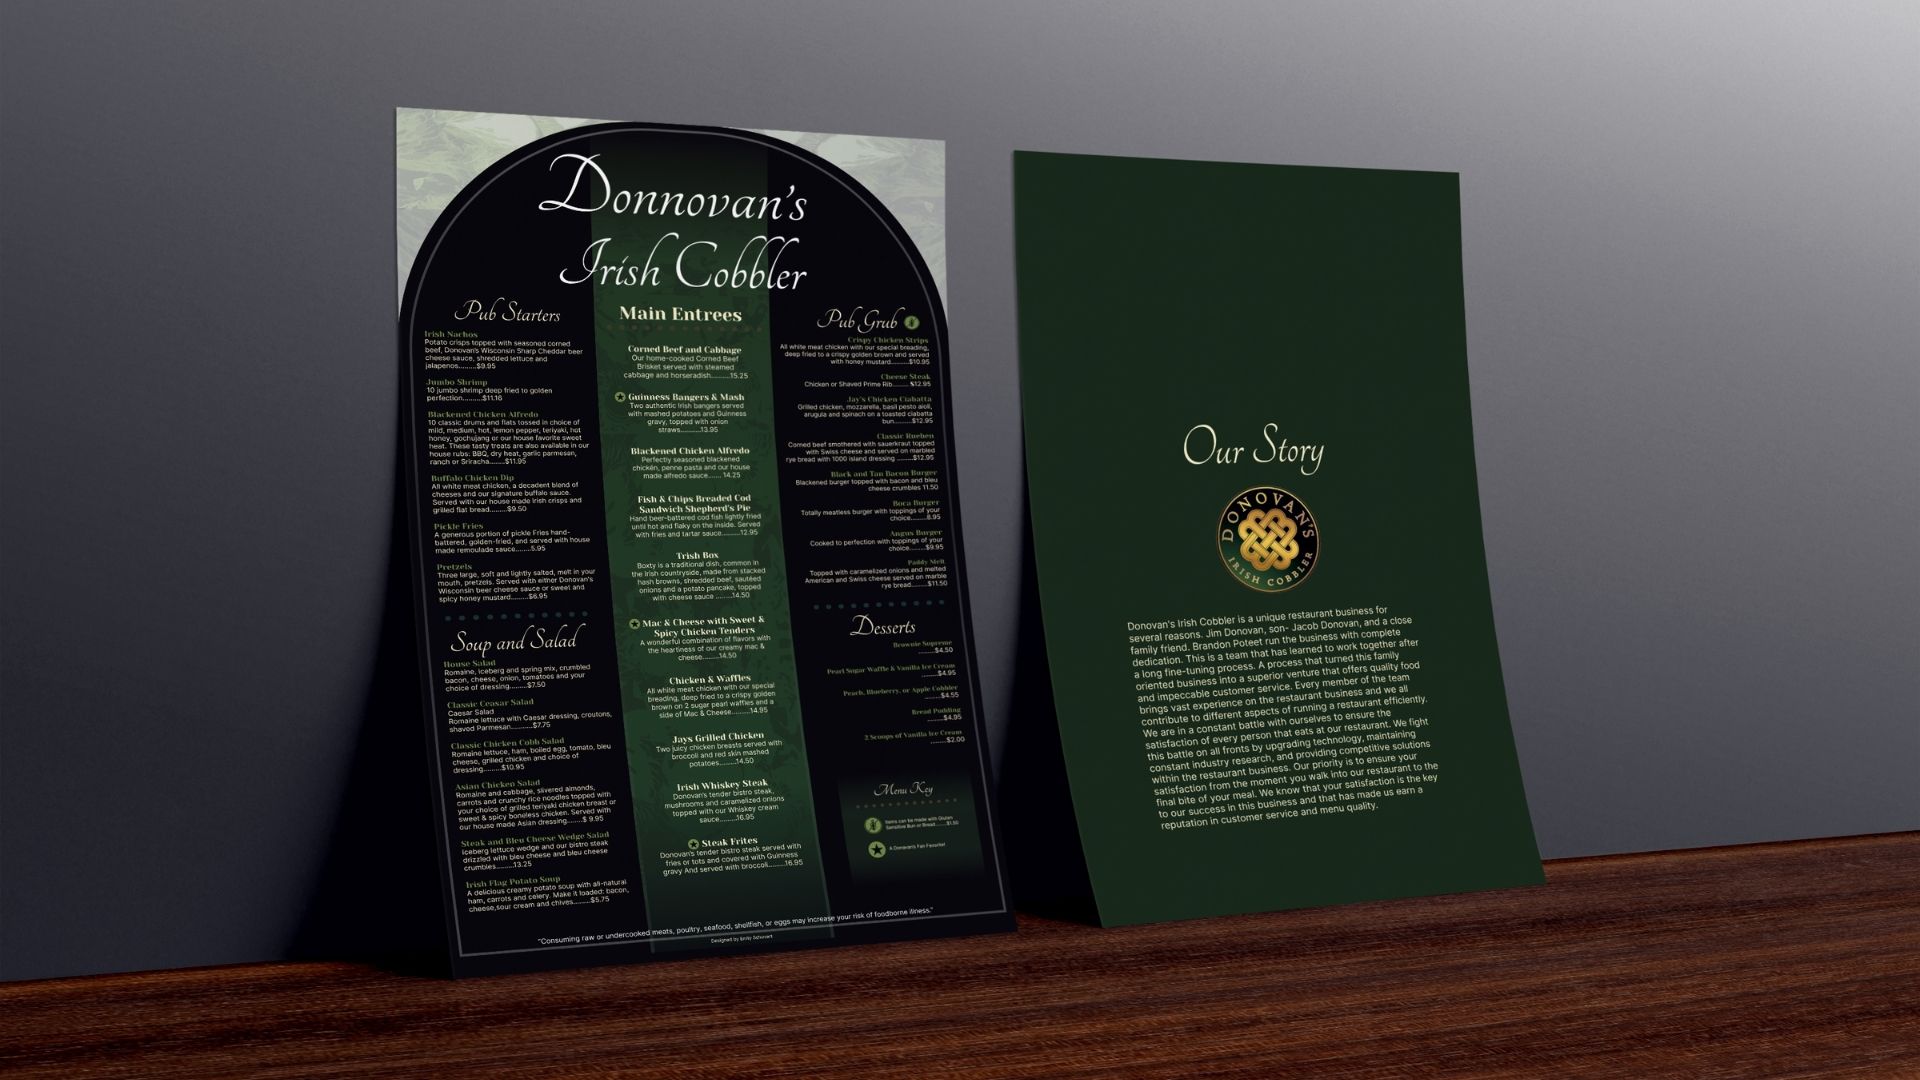 "Donovan's Menu Redesign" / "Donovan's Menu Redesign," publication design, 11 x 17 inches print, 2020. I re-branded the menu of a restaurant near me to make it more modern and easy to read.